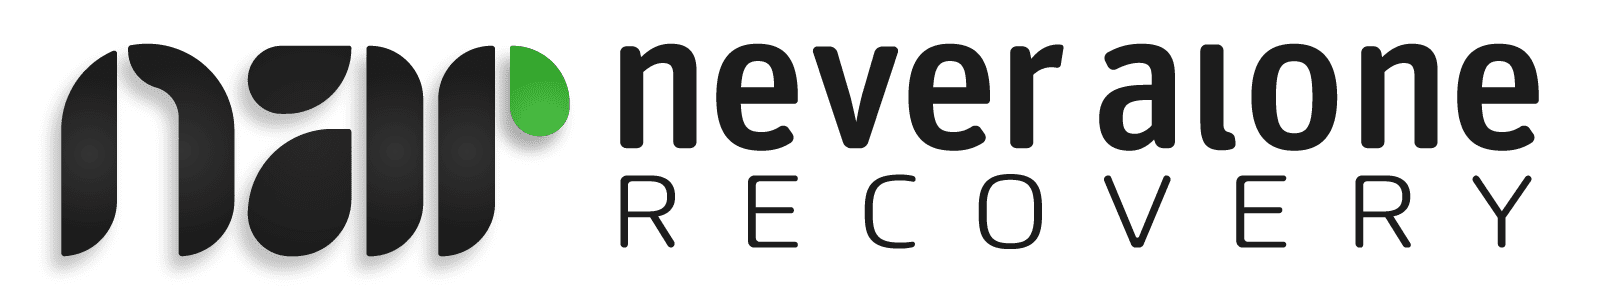 Never Alone Recovery